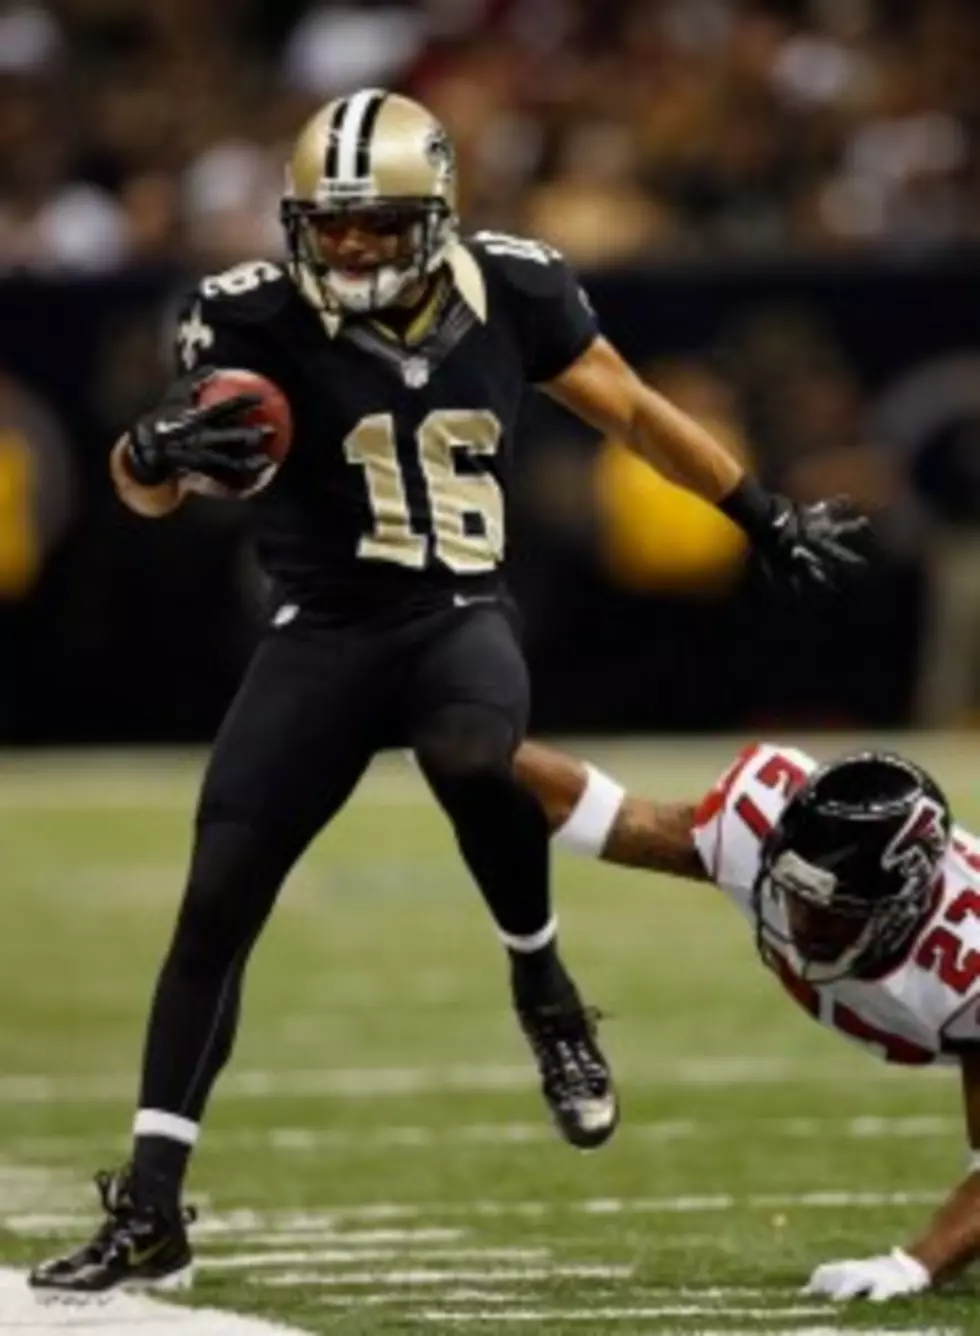 Saints And Falcons Square Off In Feisty Rivalry, Our Prediction